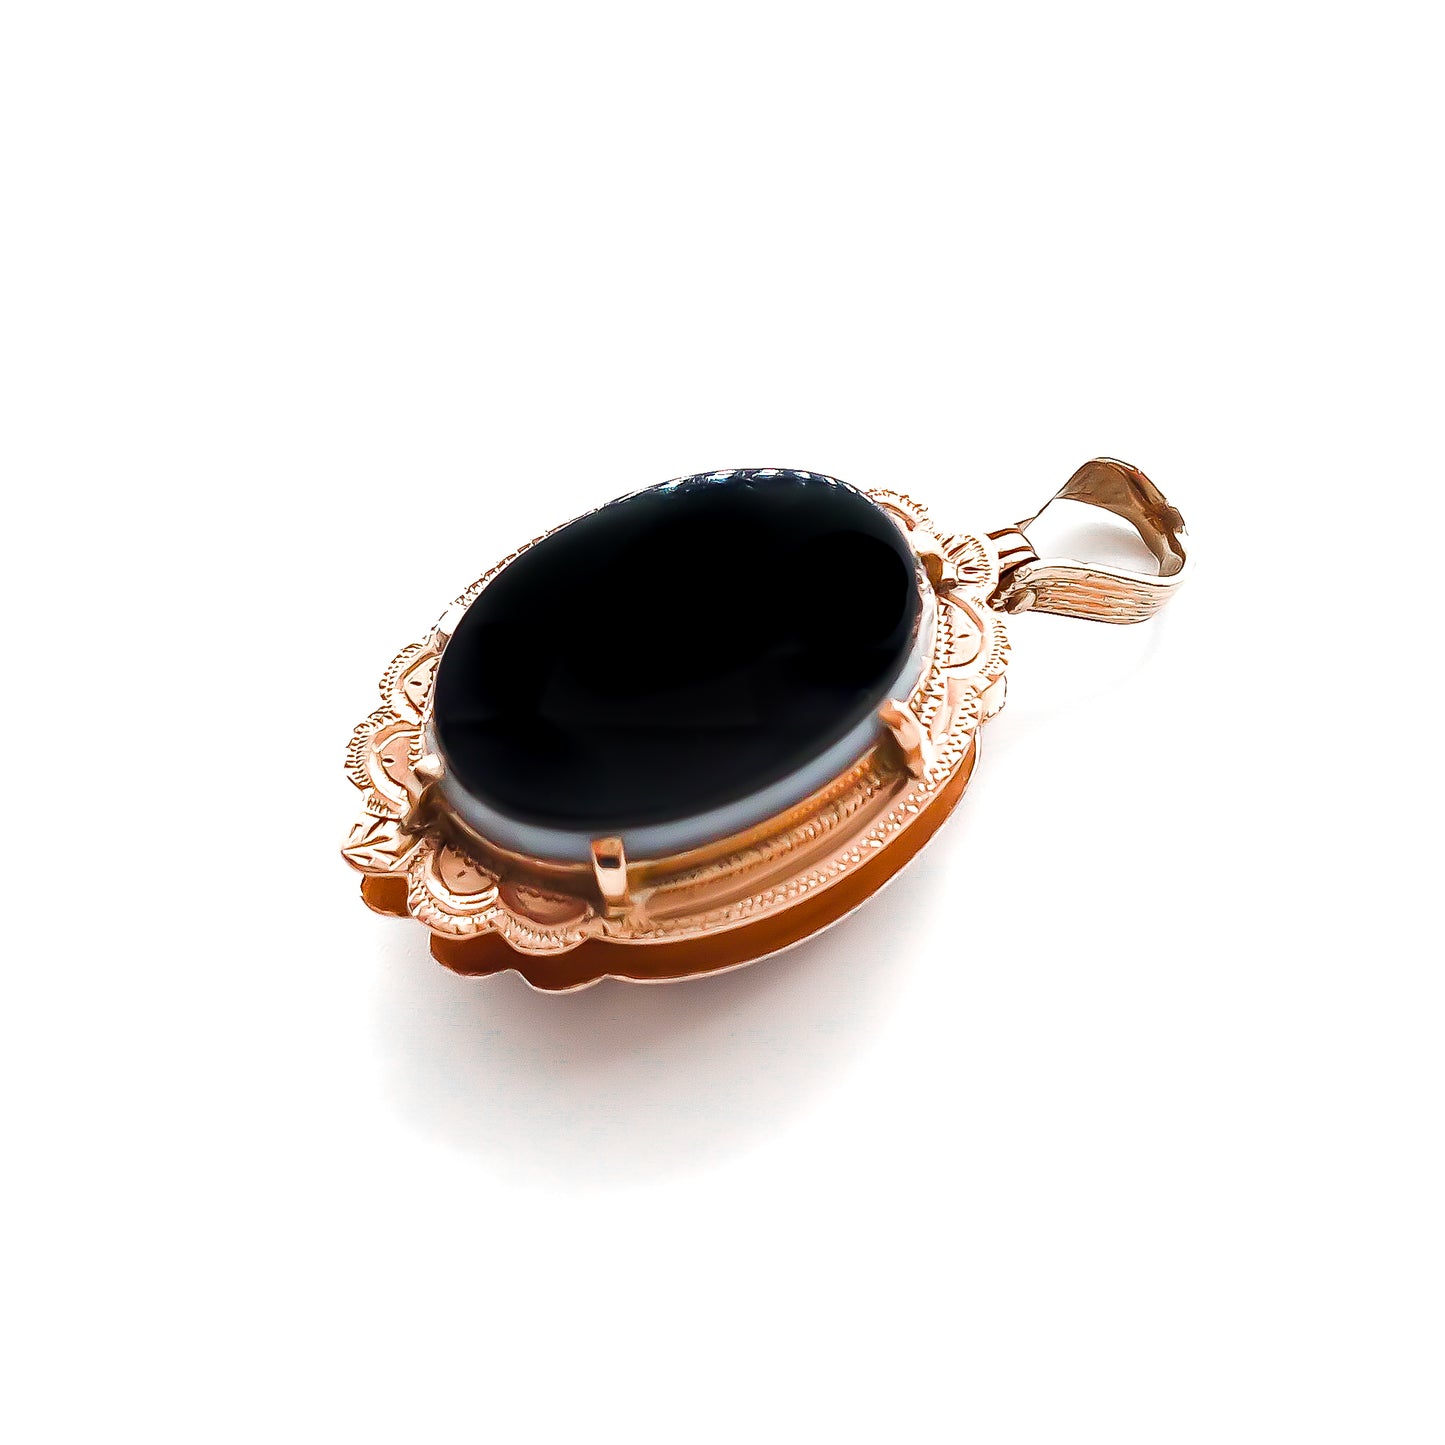 Very unusual and beautifully engraved Victorian 9ct rose gold double-sided fob set with onyx and carnelian.